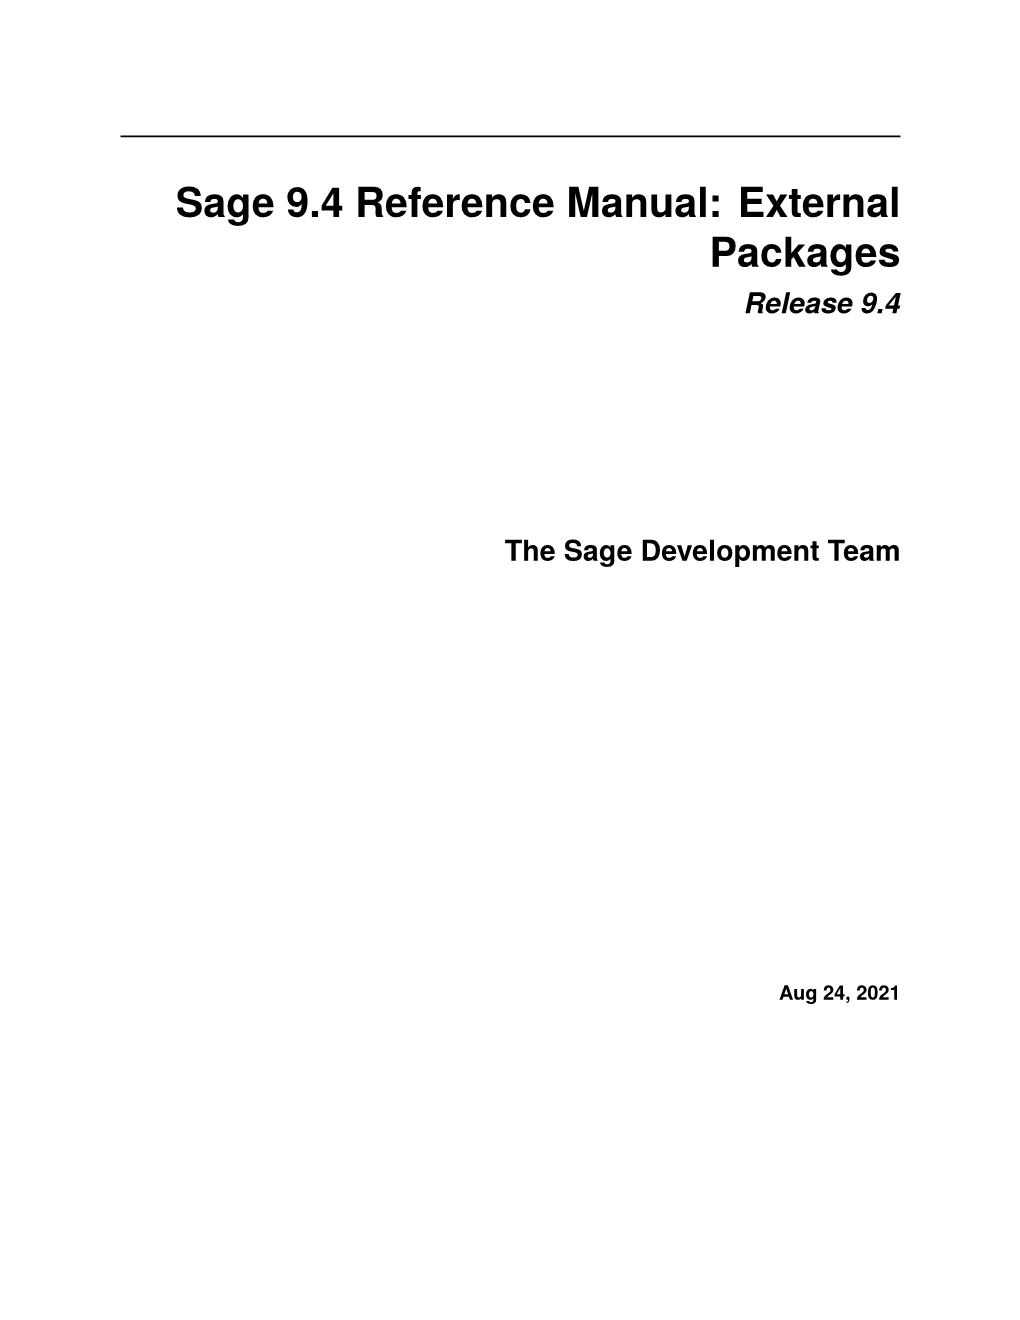 Sage 9.3 Reference Manual: External Packages